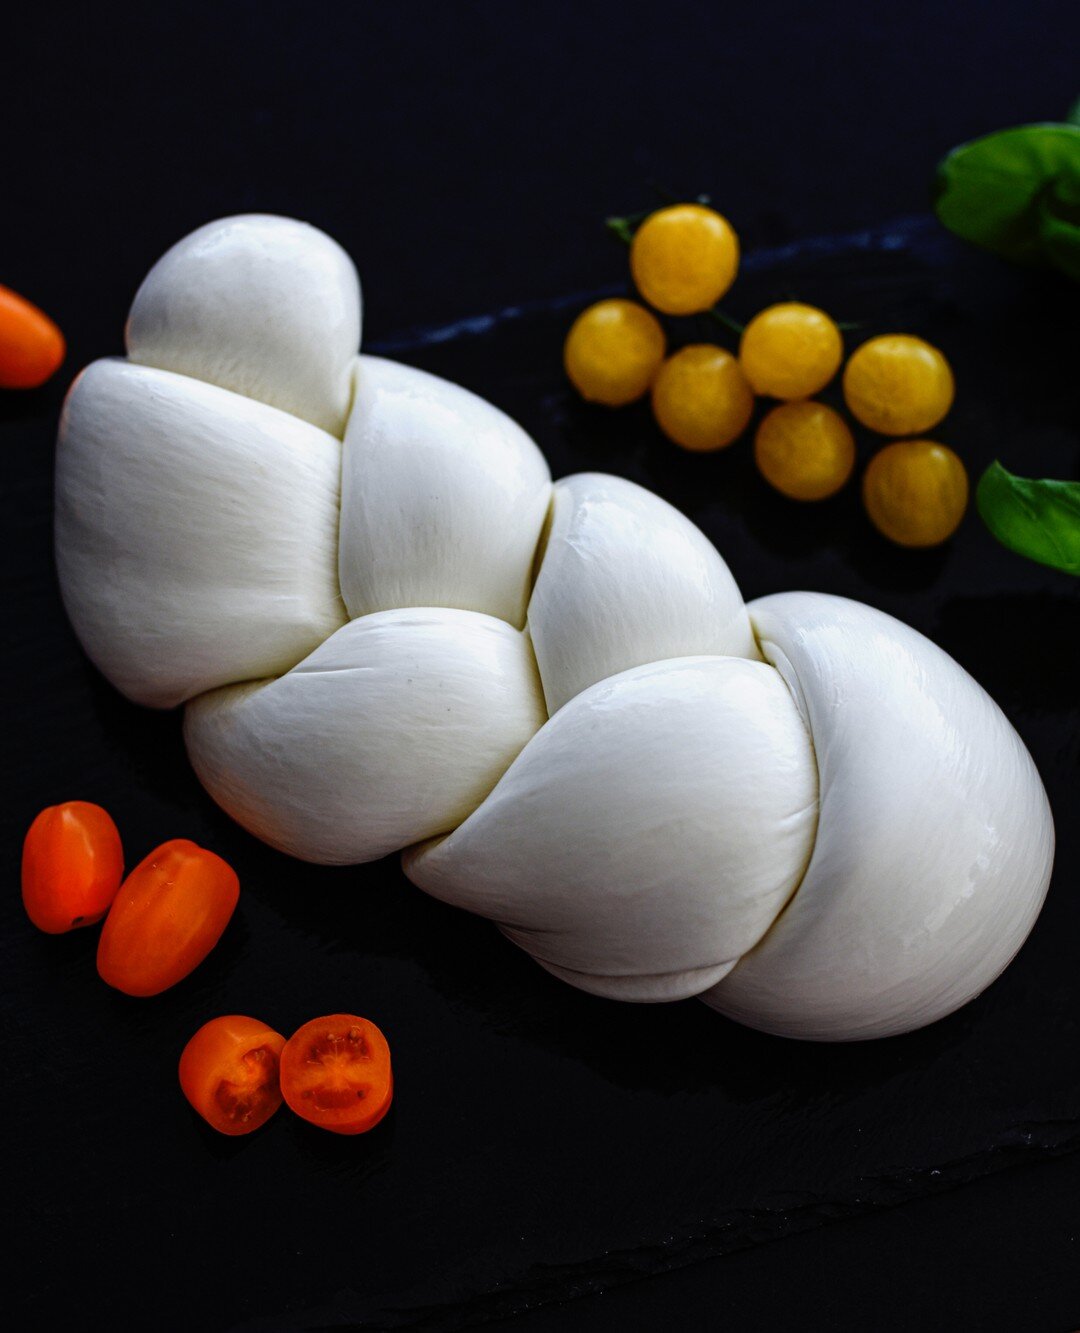 Mozzarella handcrafted in the shape of braids, to add an original and elegant touch to appetizers or salads ⁠
----------------------------------------------⁠
🛒Italian Dairy Products ⁠
⁠
📲 Order NOW ⁠- Link in Bio⁠
⁠
Use our App - Italian Dairy Prod